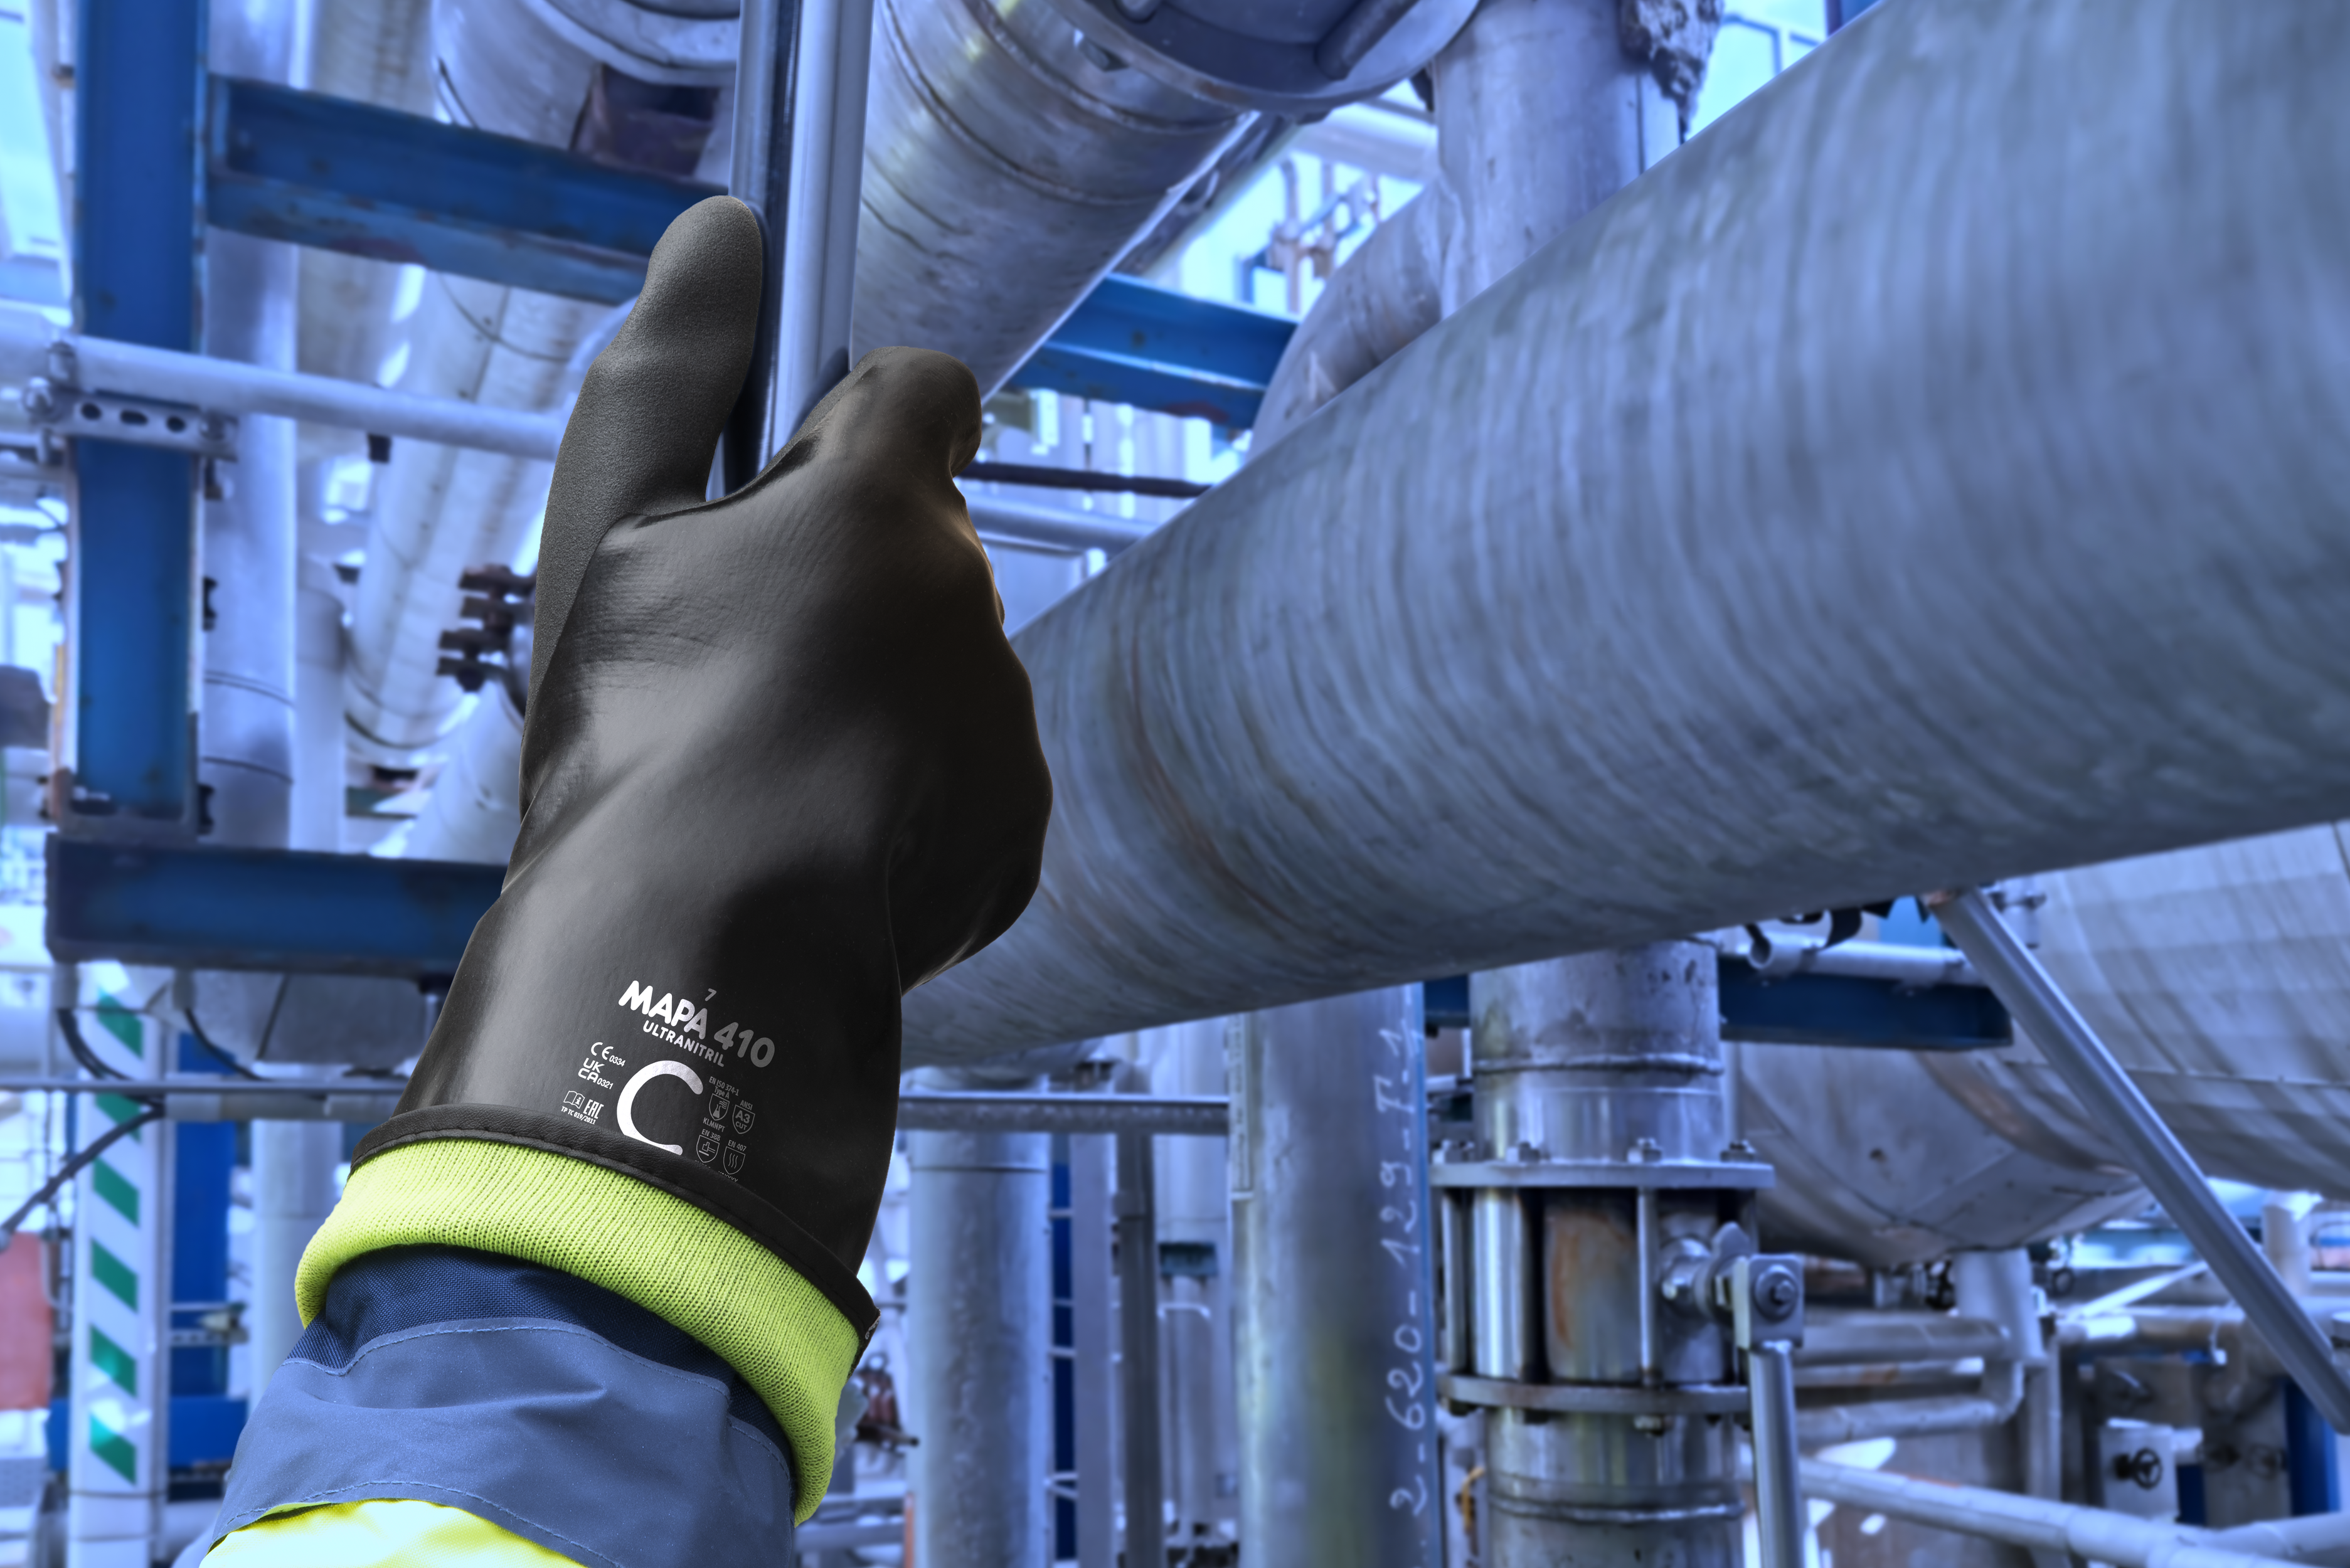 UltraNitril 410: Combine both CHEMICAL & CUT protection in ONE glove